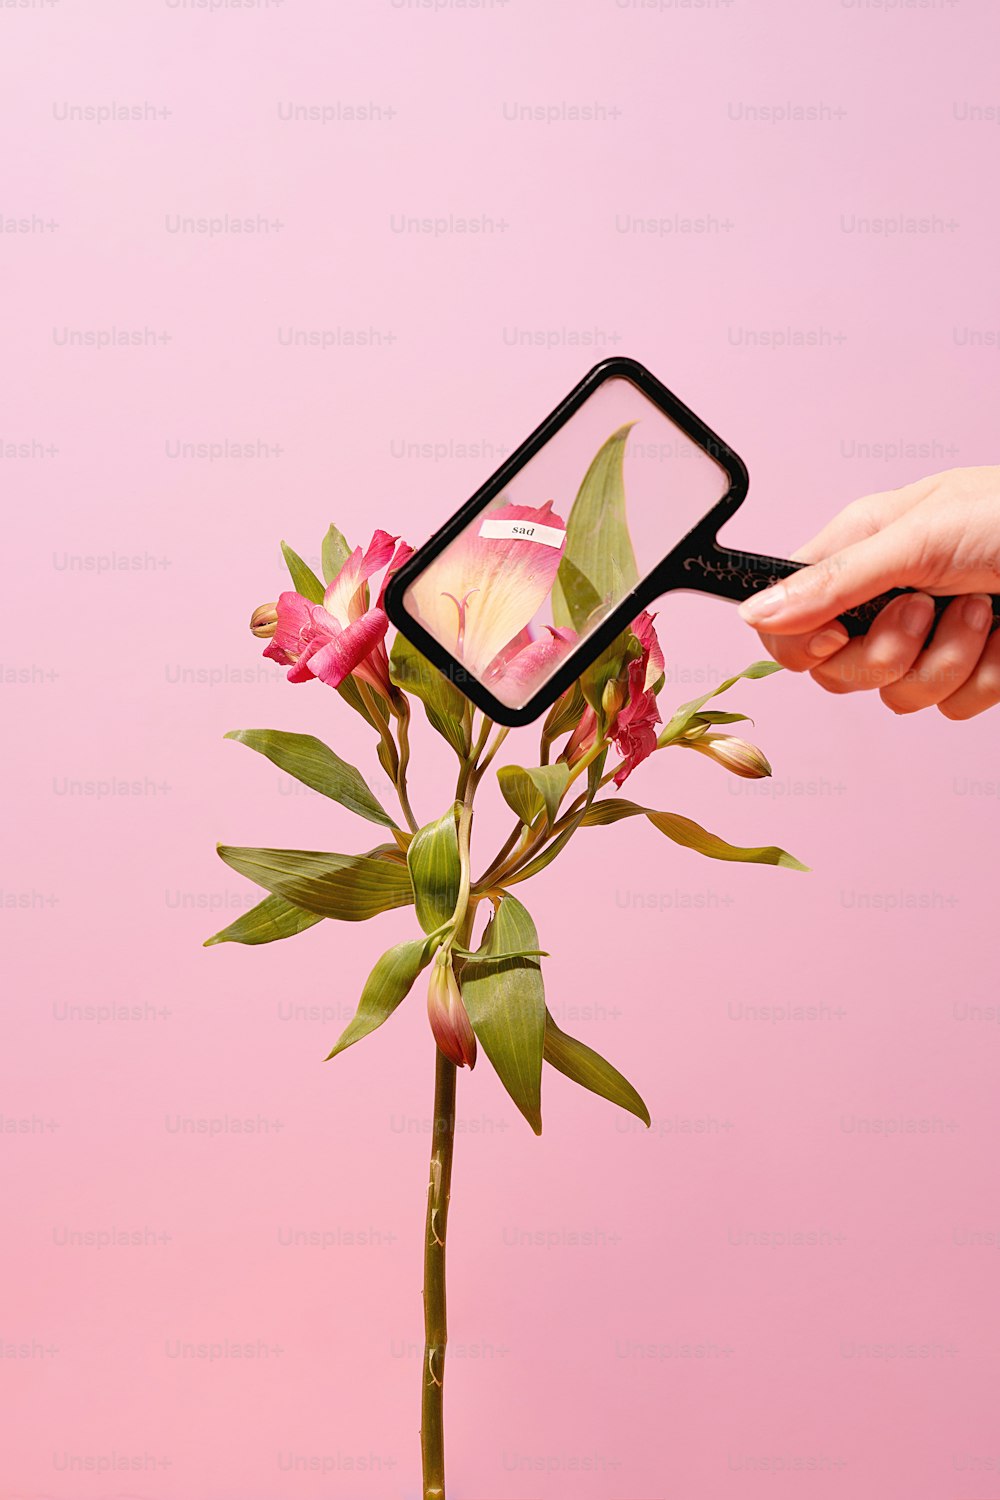 a person holding a flower in front of a pink background